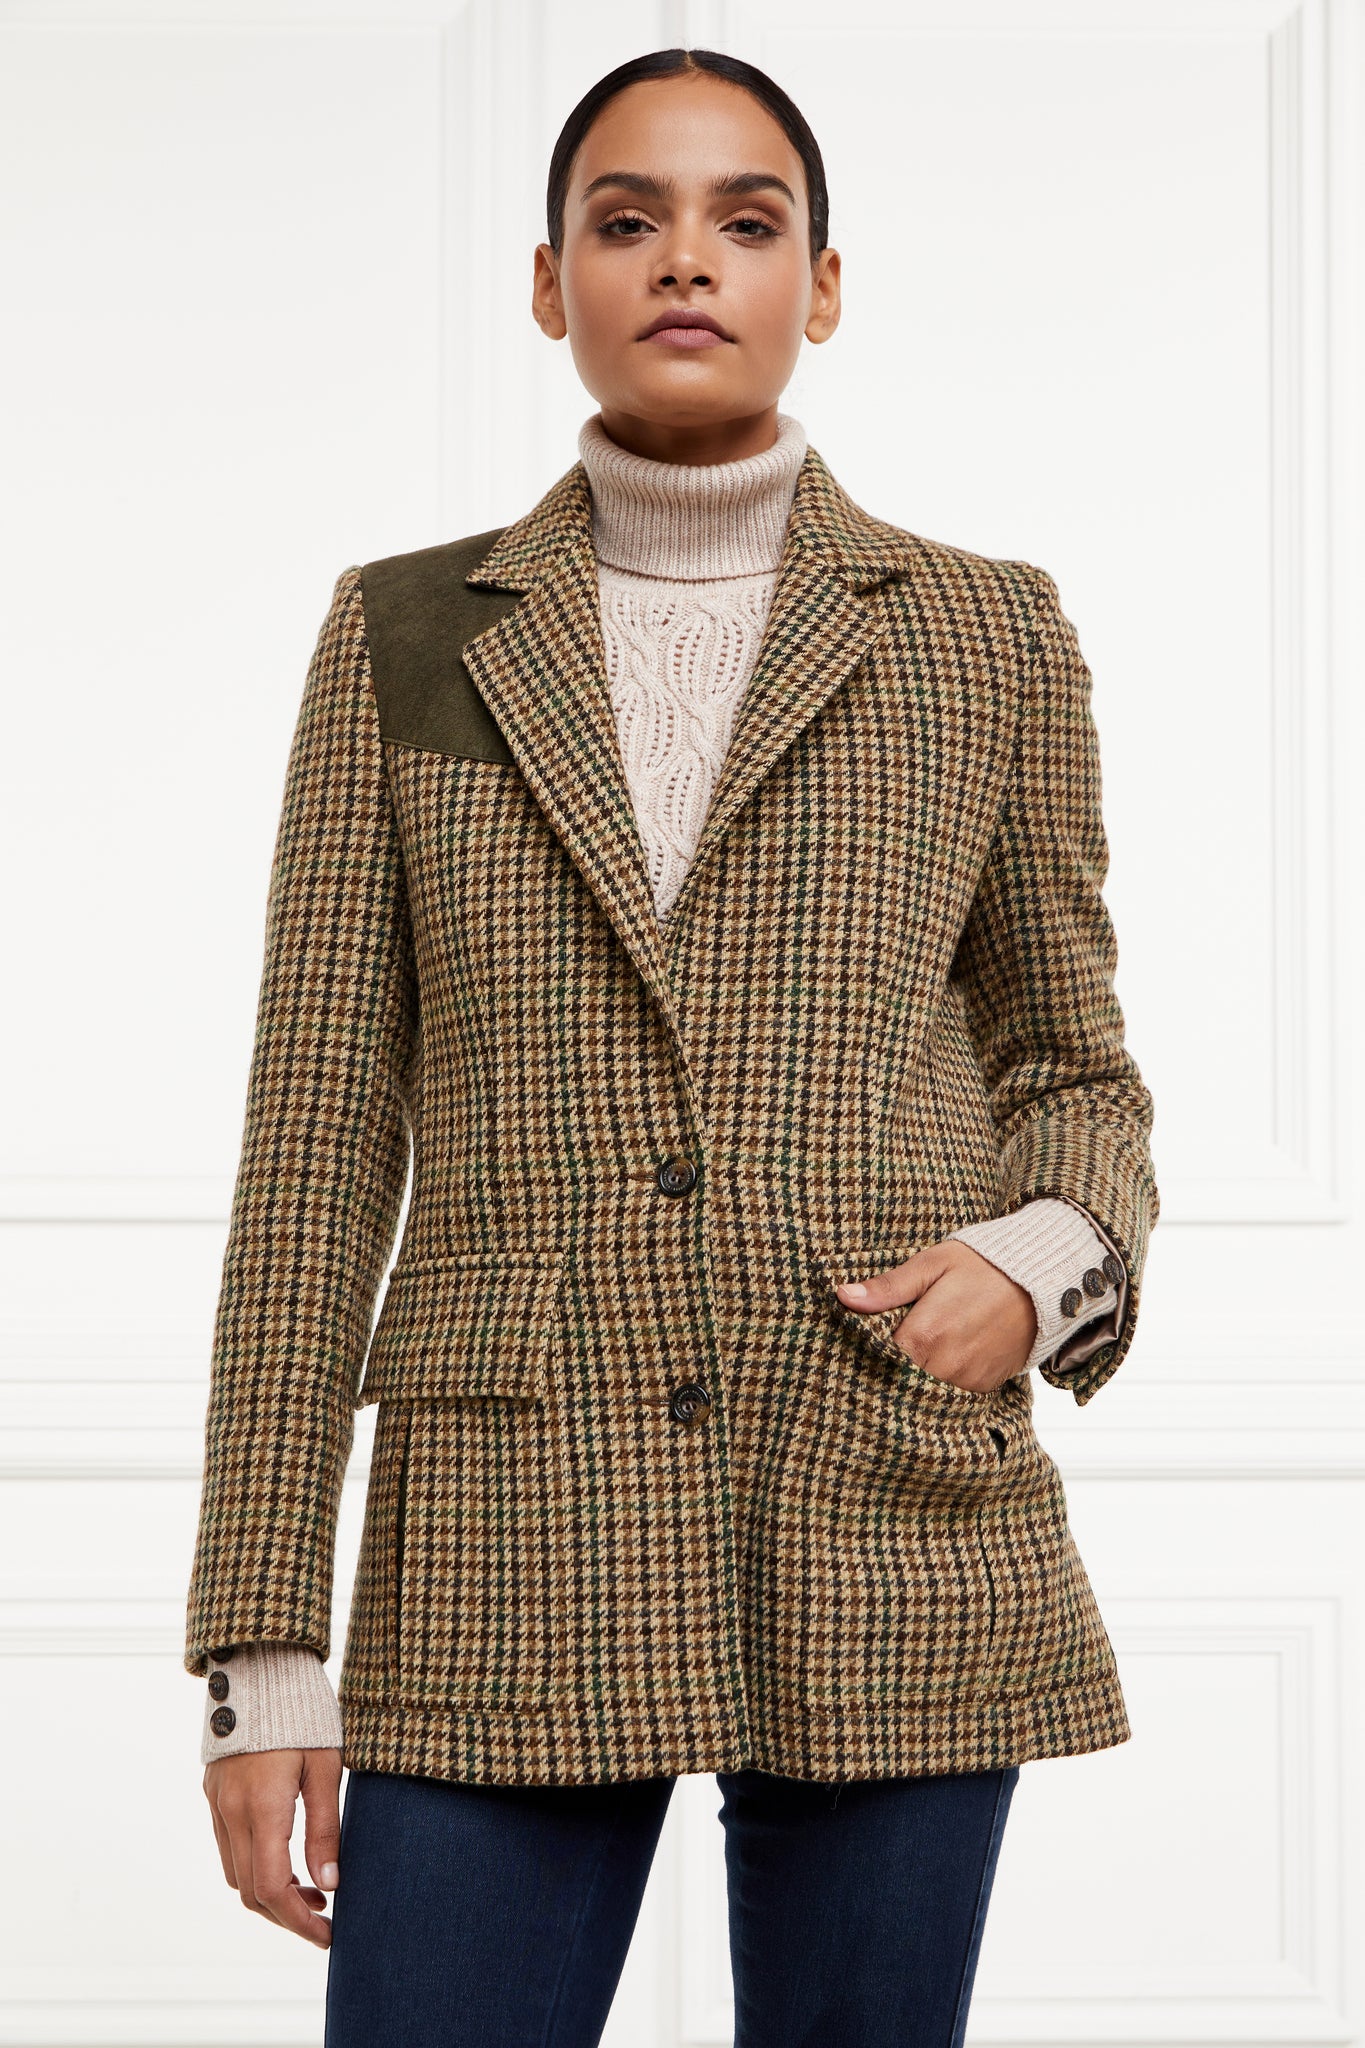 womens classic slim fit single breasted blazer in green tan and brown houndstooth tweed with lower patch pockets with concealed button flap contrast khaki suede shoulder gun patch with elbow patches and horn button finish on cuffs and front